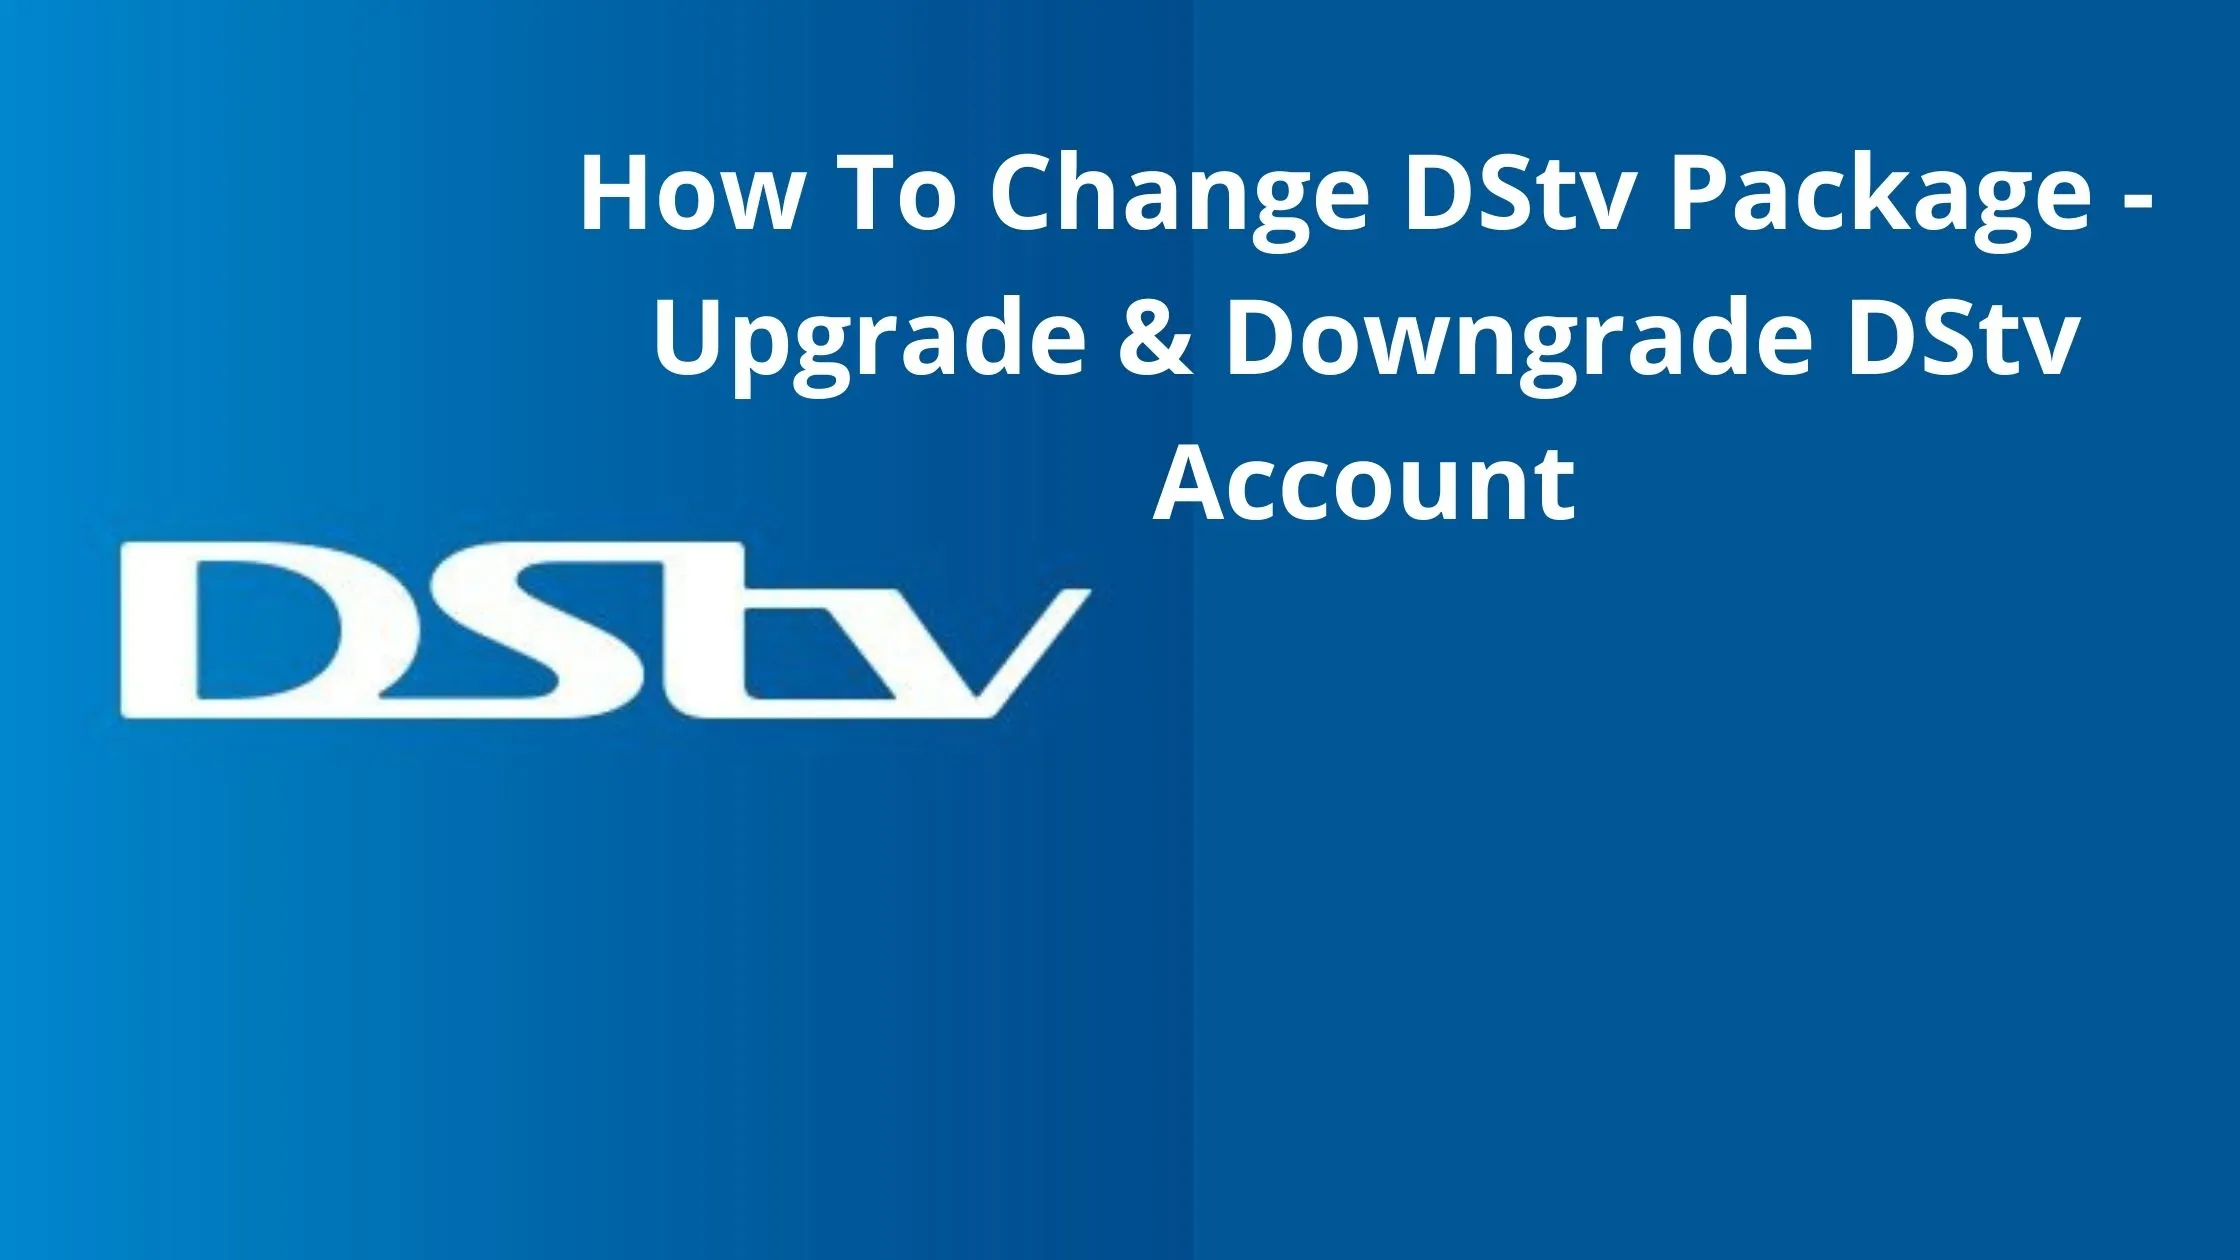 IS DSTV CHEAP OR EXPENSIVE? How Do I Change DSTV Packages In South Africa Via Cellphone